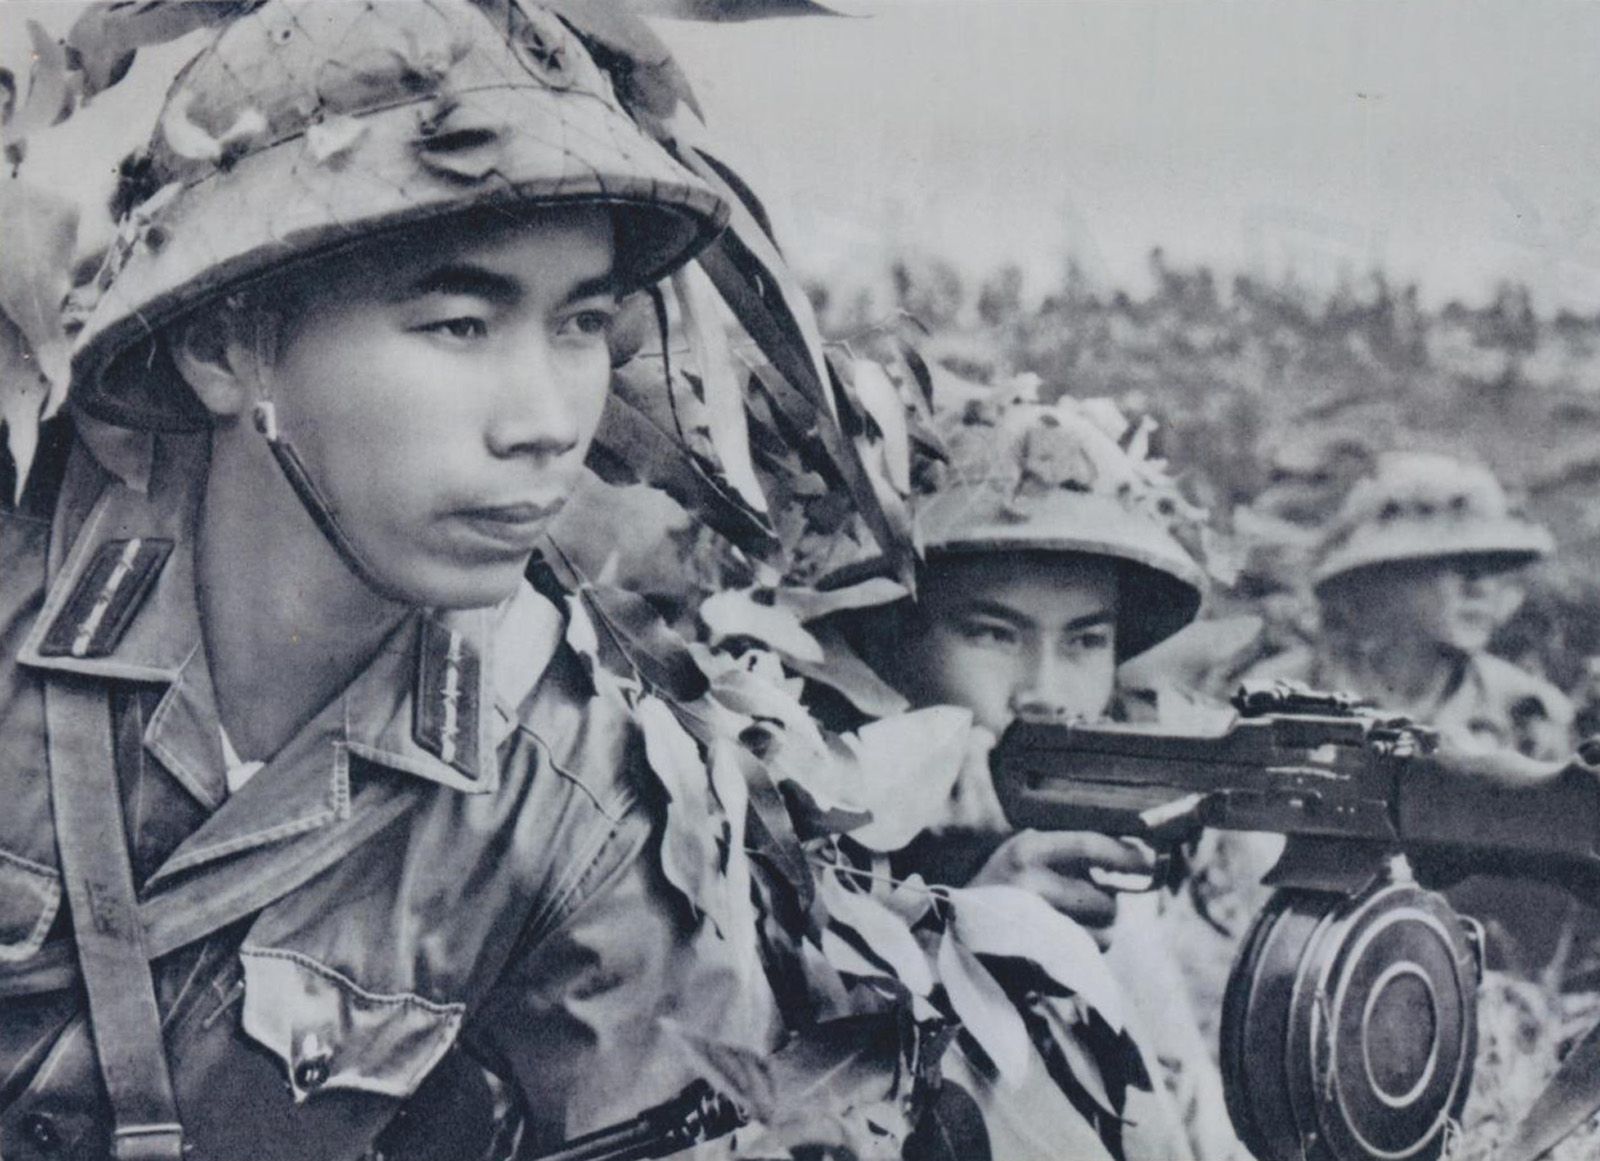 North Vietnamese soldiers. Image courtesy of Flickr user manhhai [CC by 2.0]. Vietnam, date unknown. 